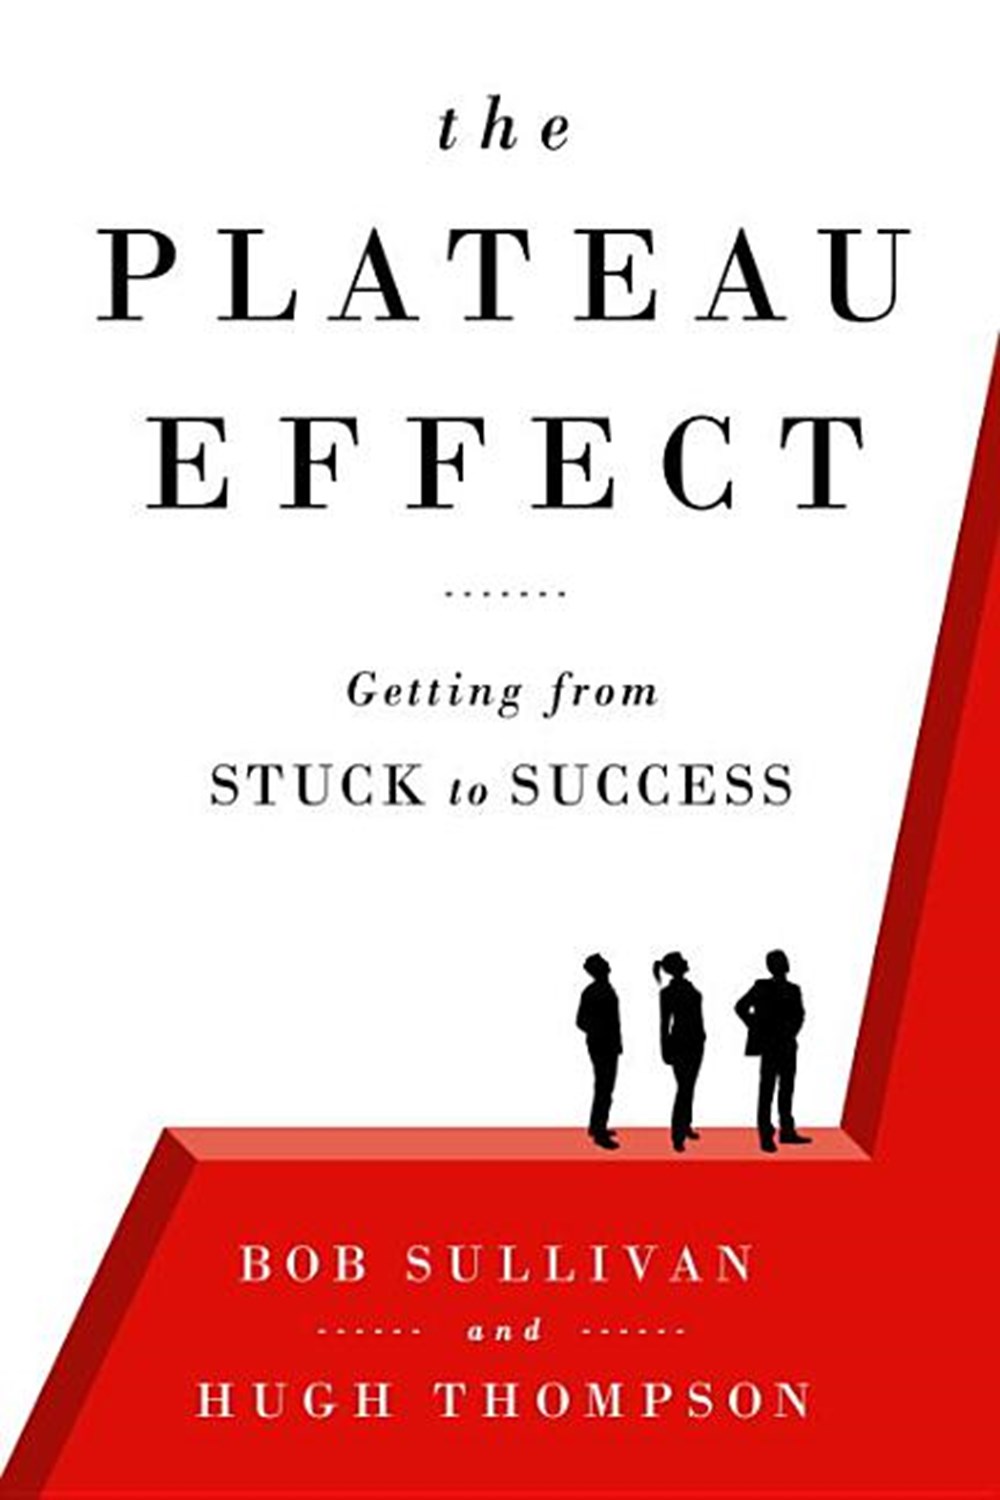 Plateau Effect: Getting from Stuck to Success